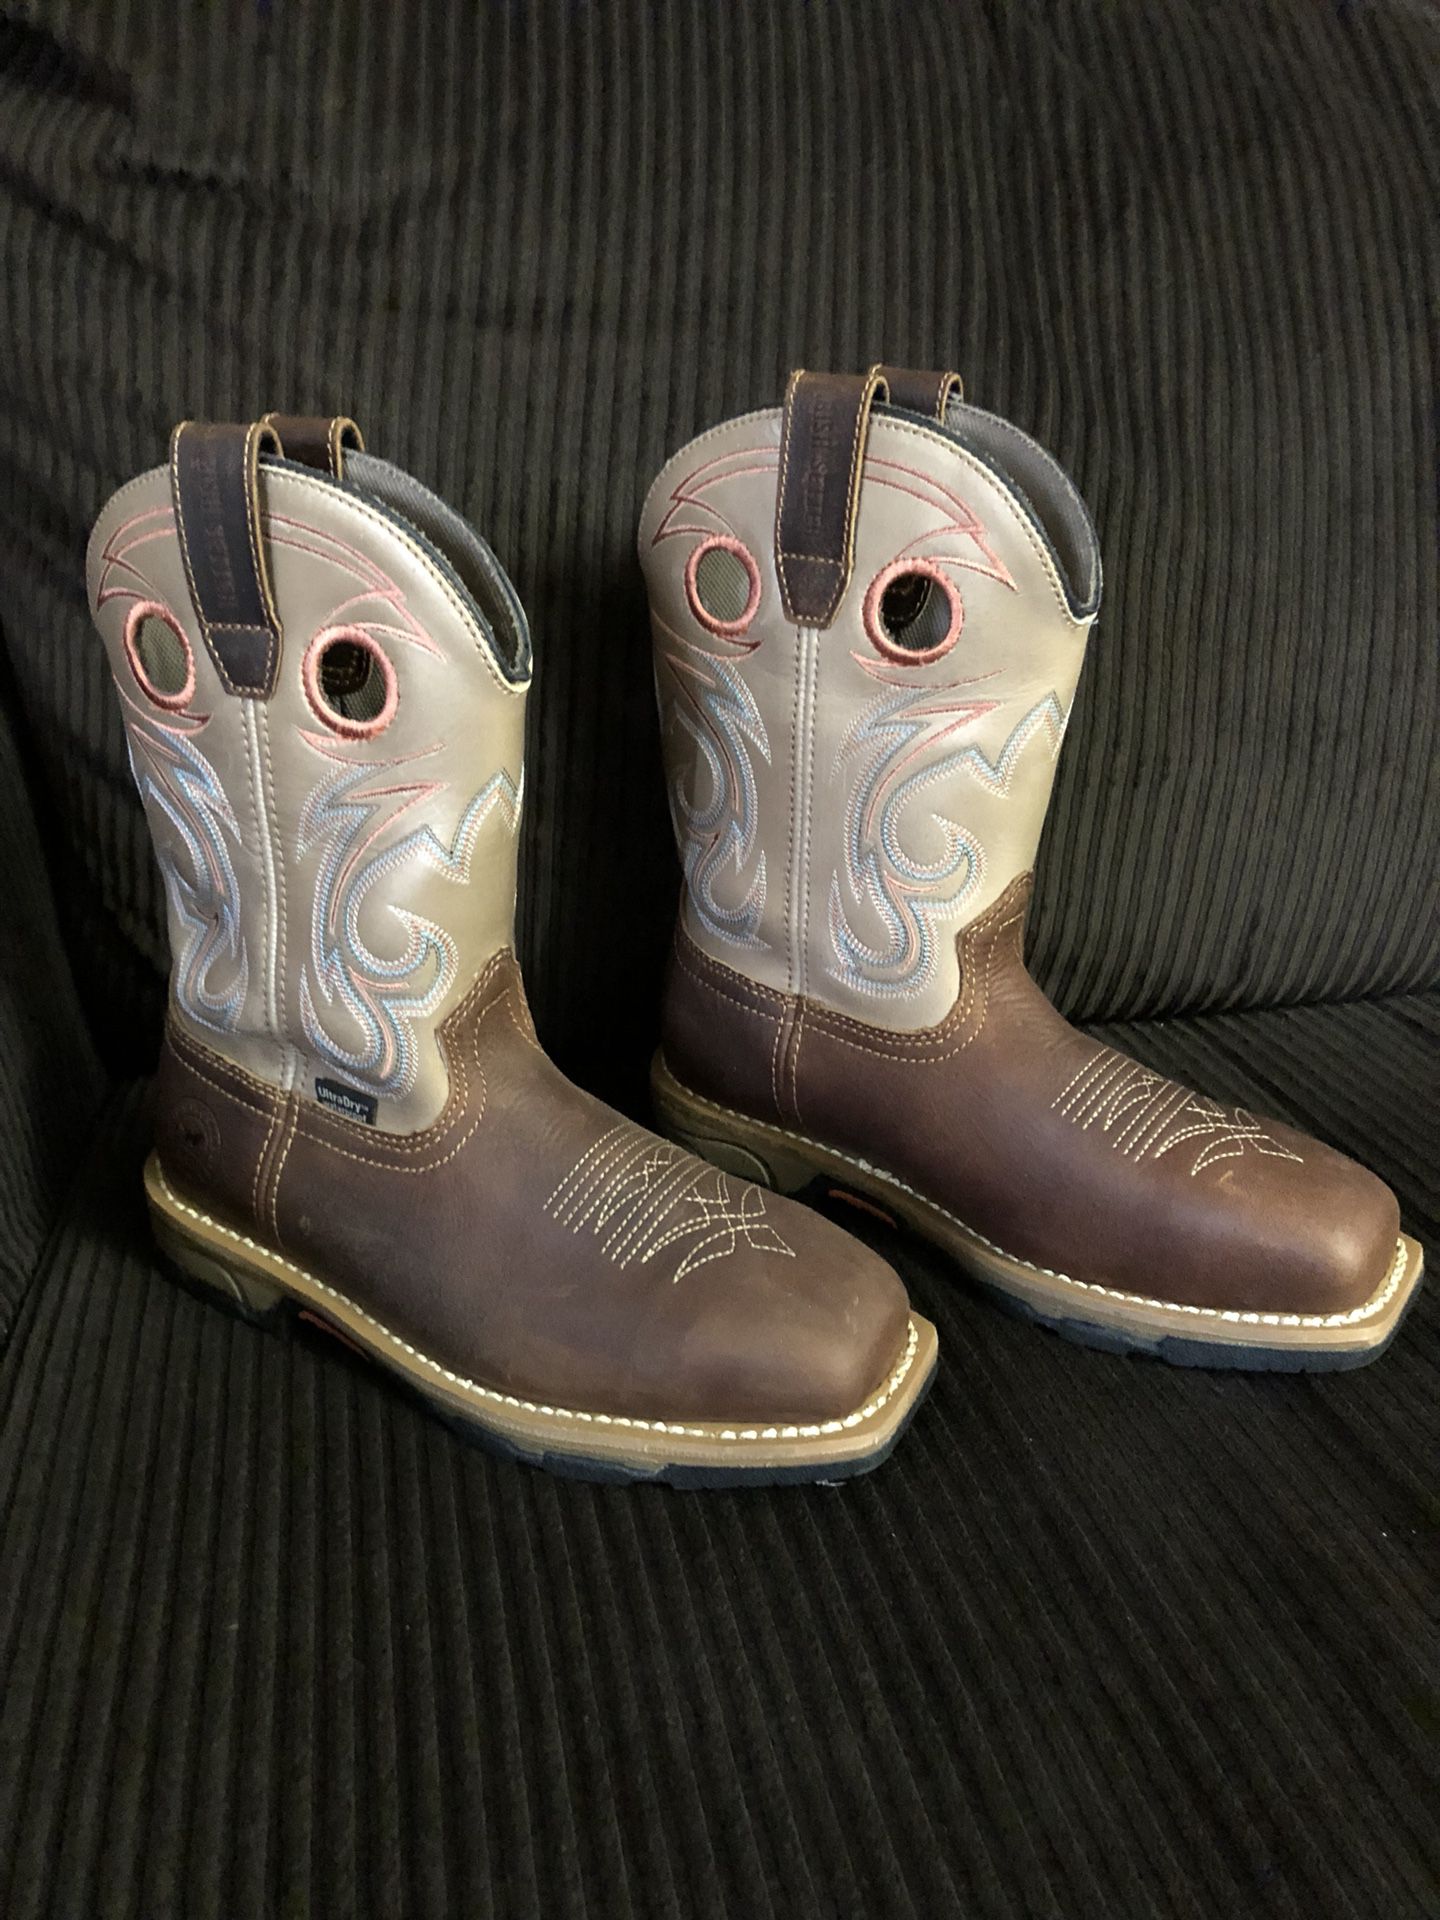 Red wing shoes / boots